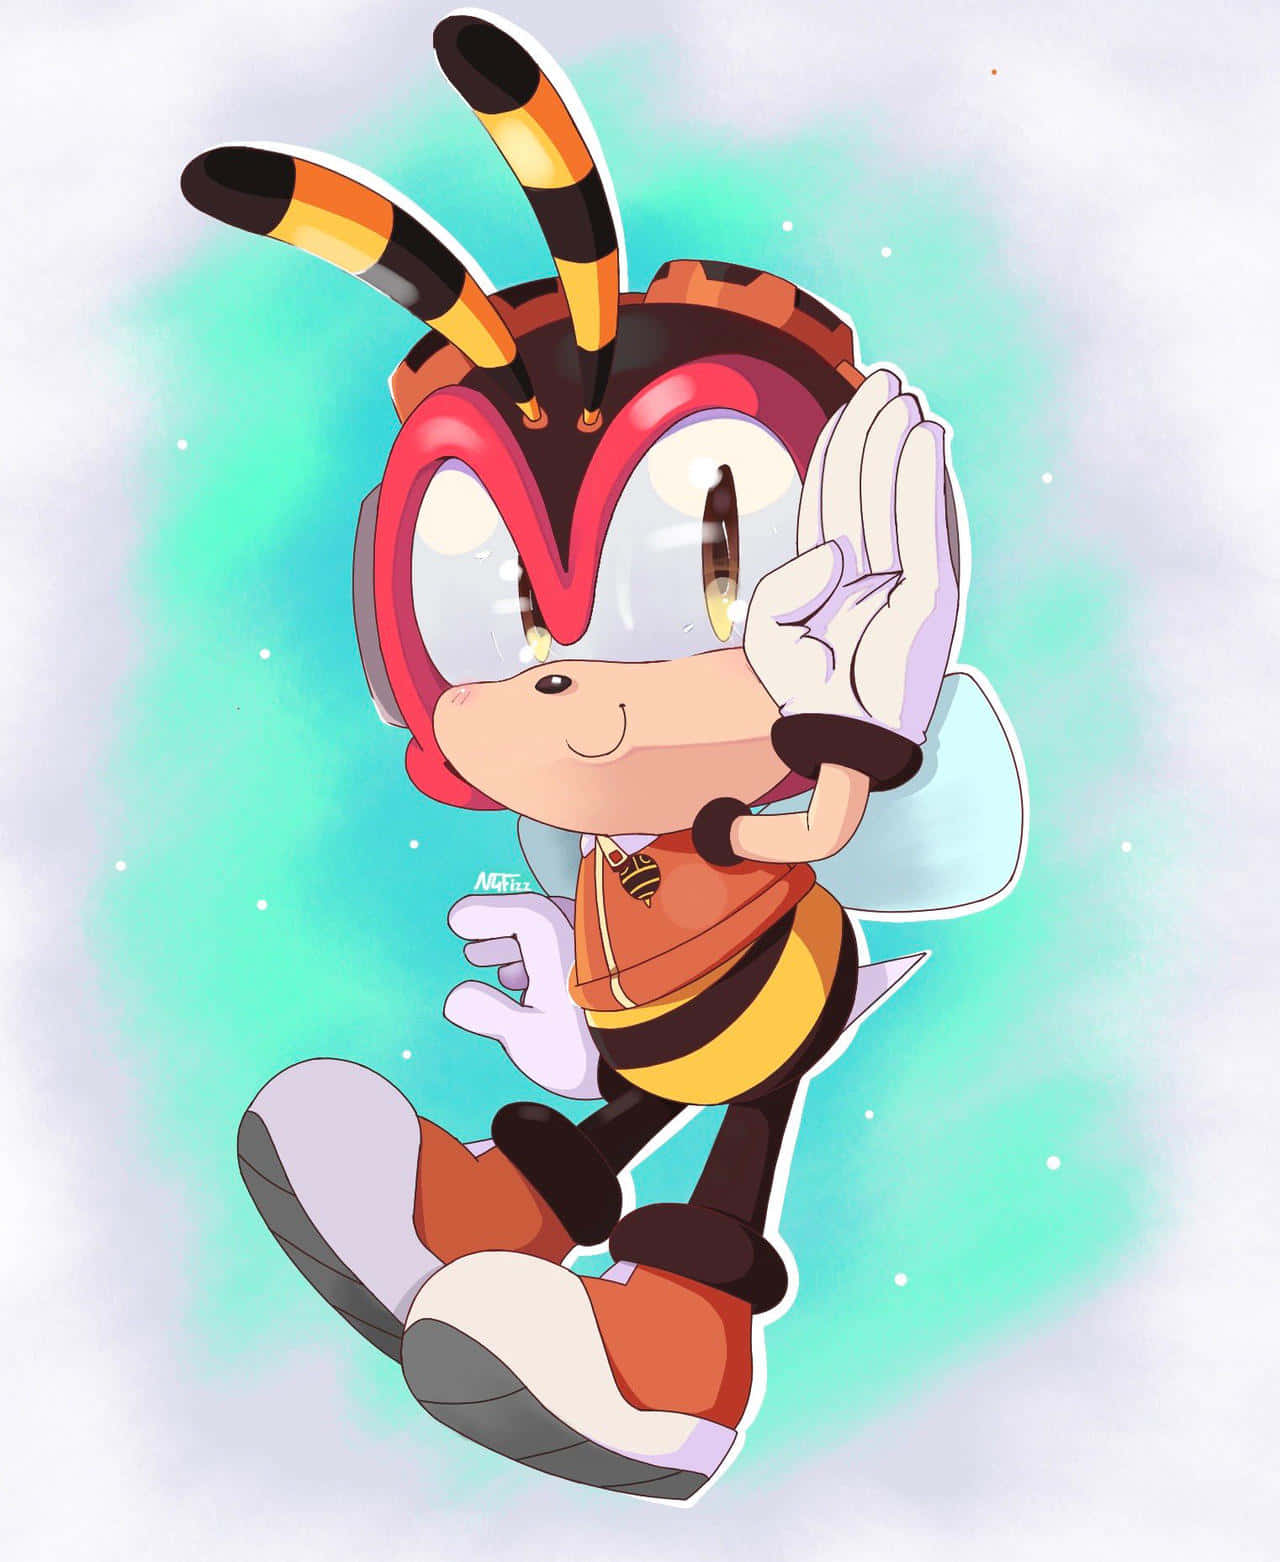 Adorable Charmy Bee in action Wallpaper